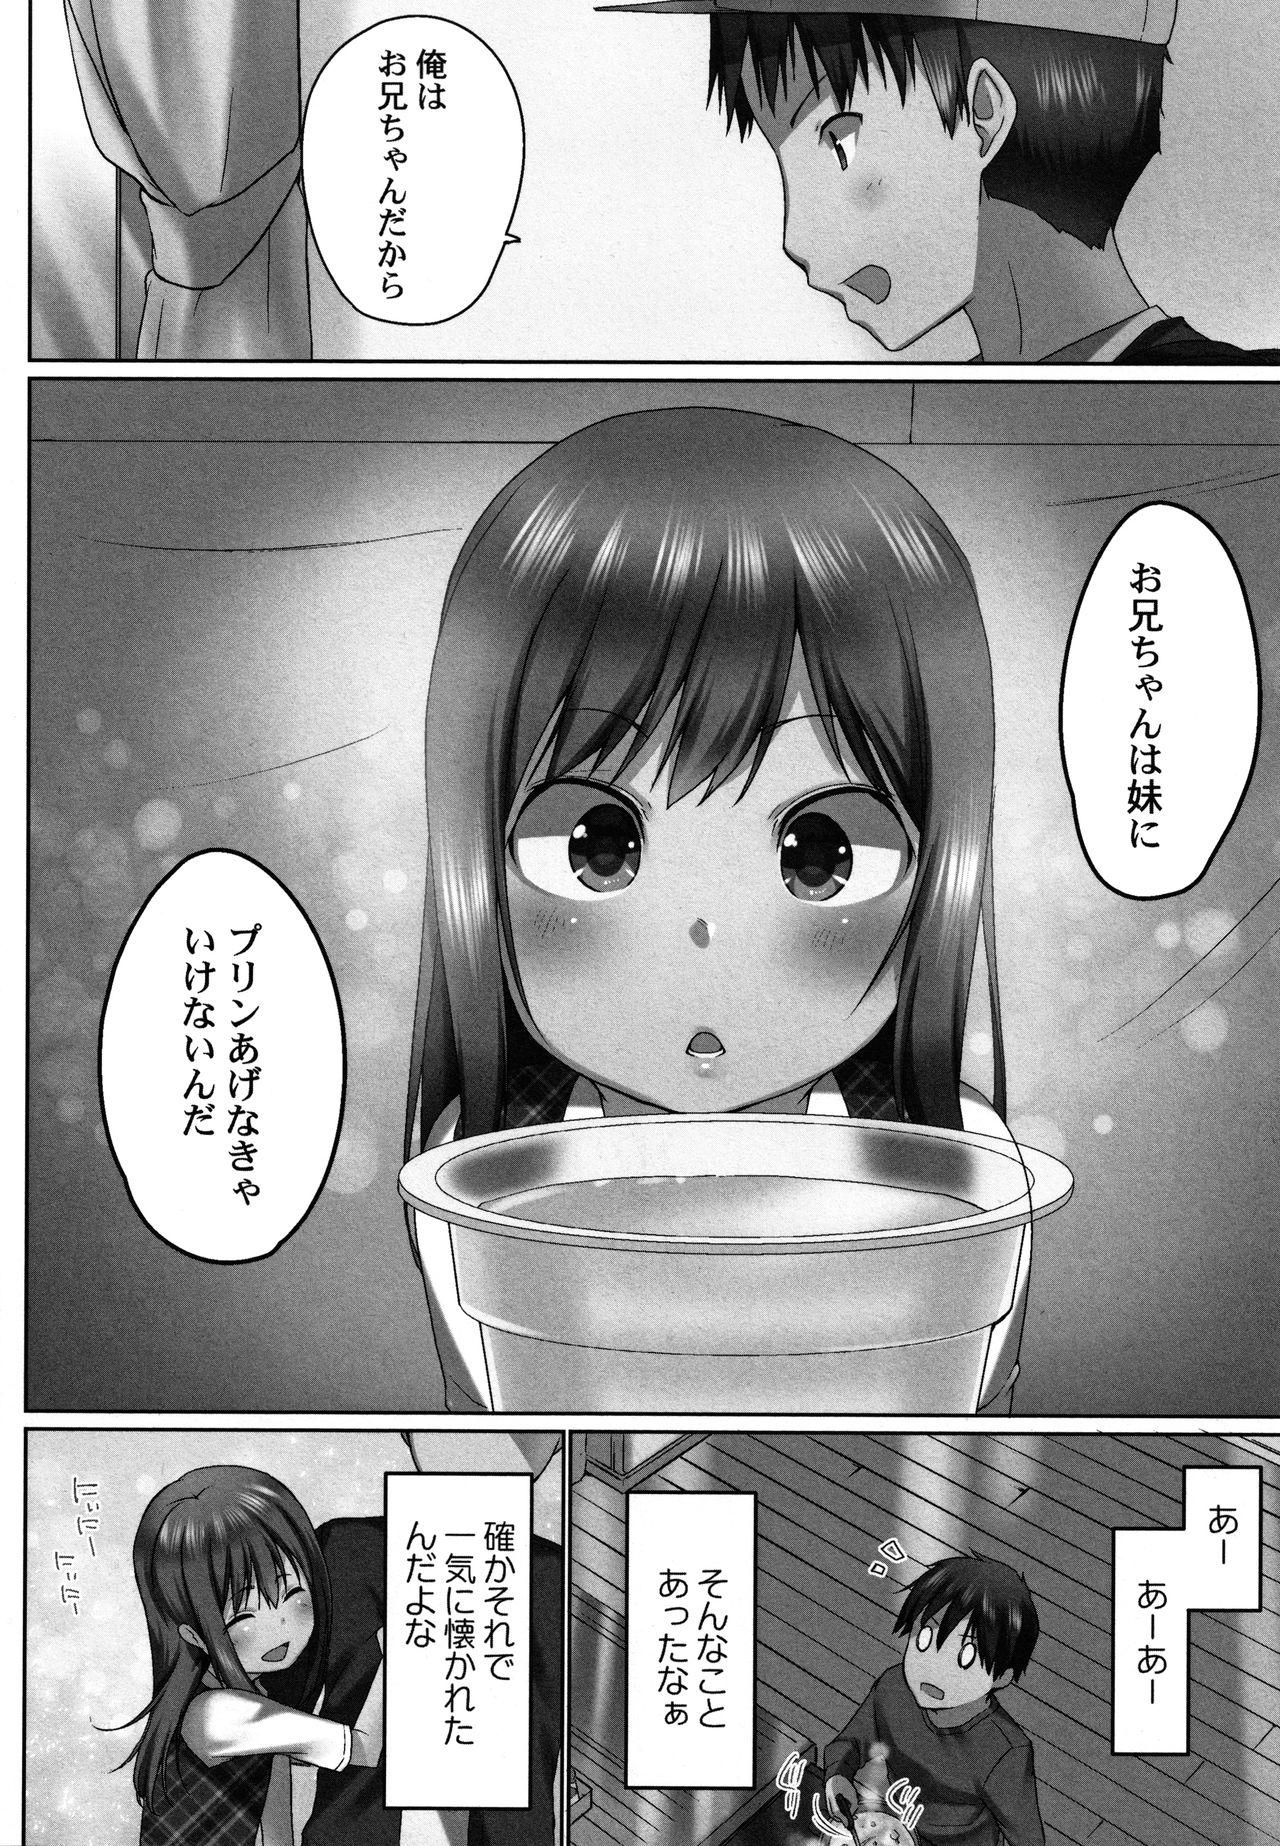 Overflow Page 11 Of 165 hentai comic, Overflow Page 11 Of 165 hentai doujin...